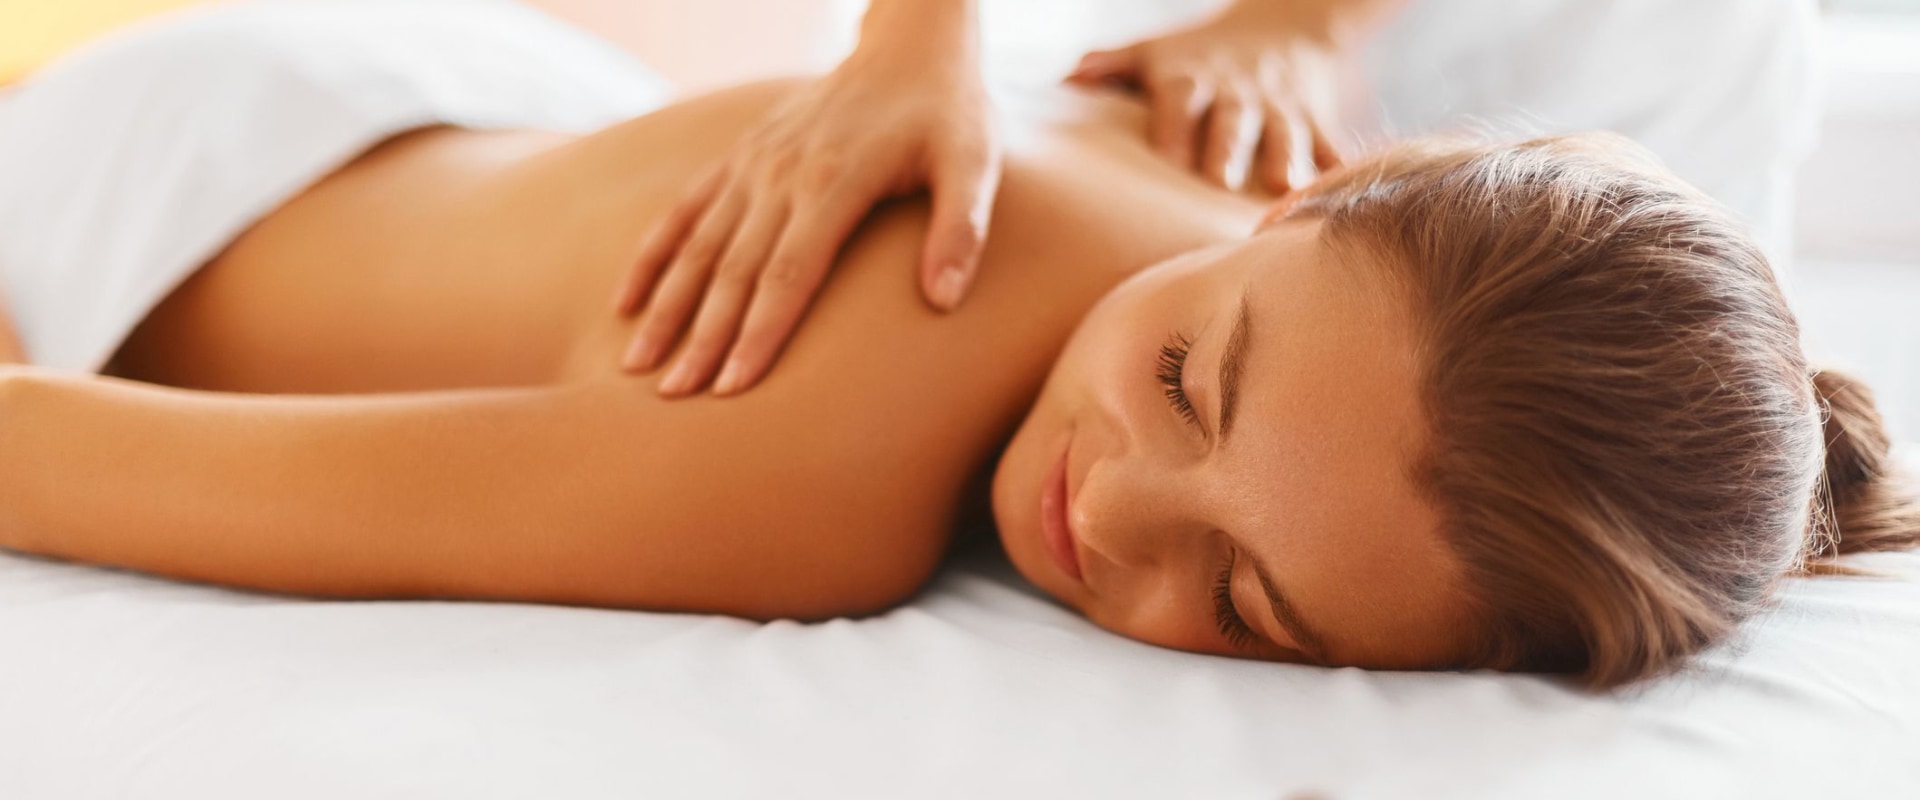 What is the purpose of a massage therapist?